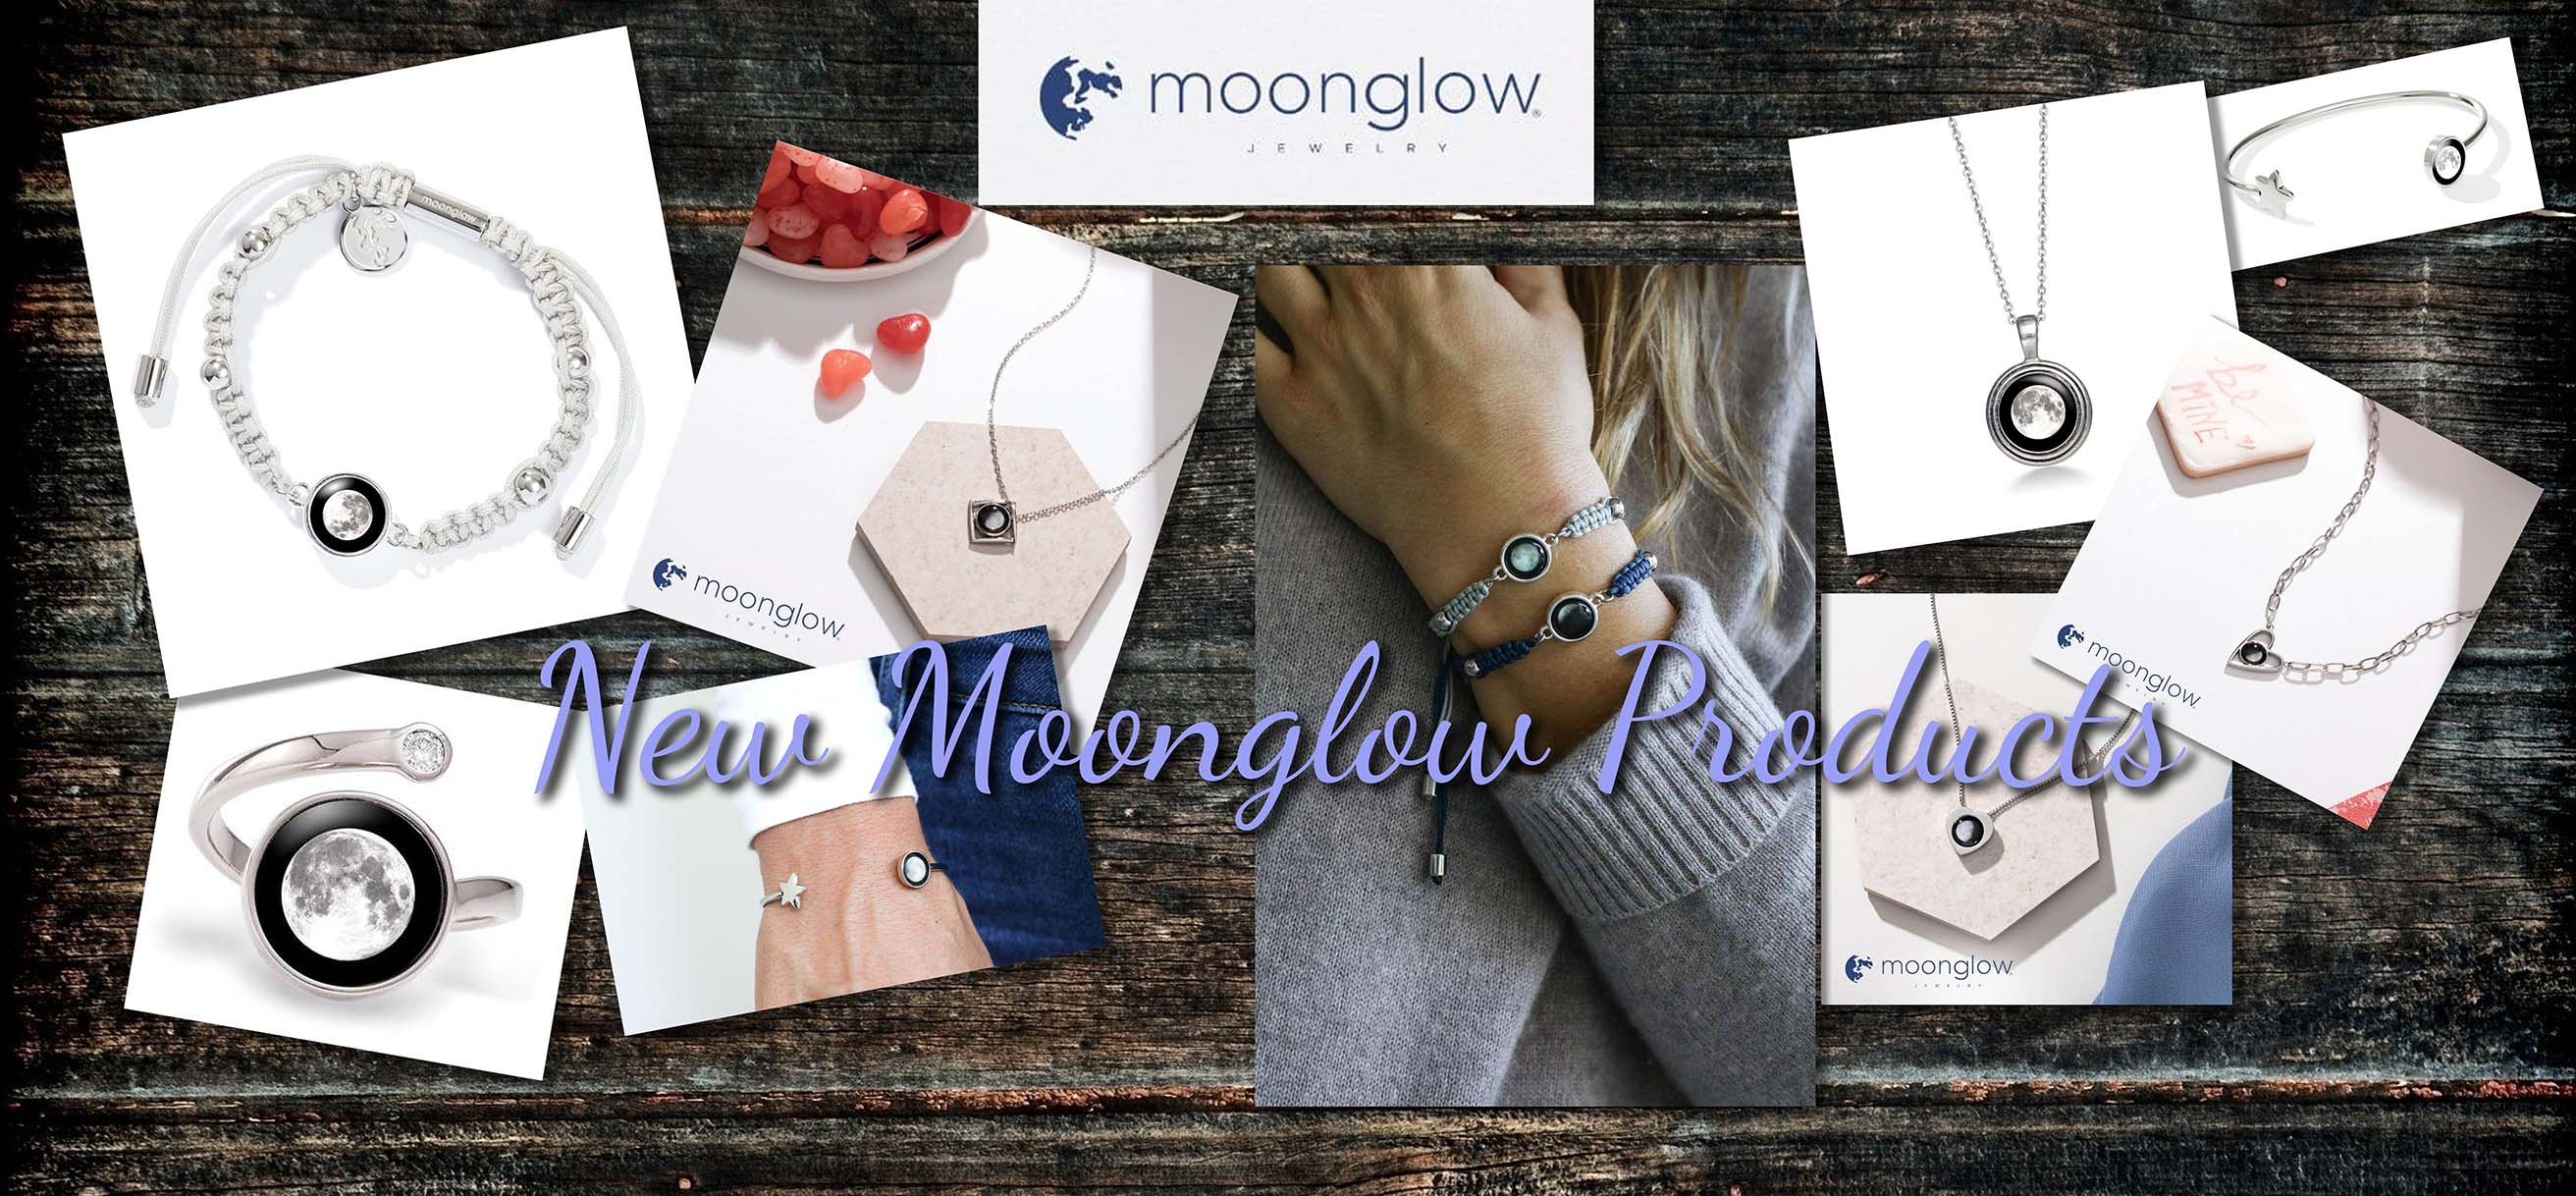 Moonglow at Turnmeyer Galleries